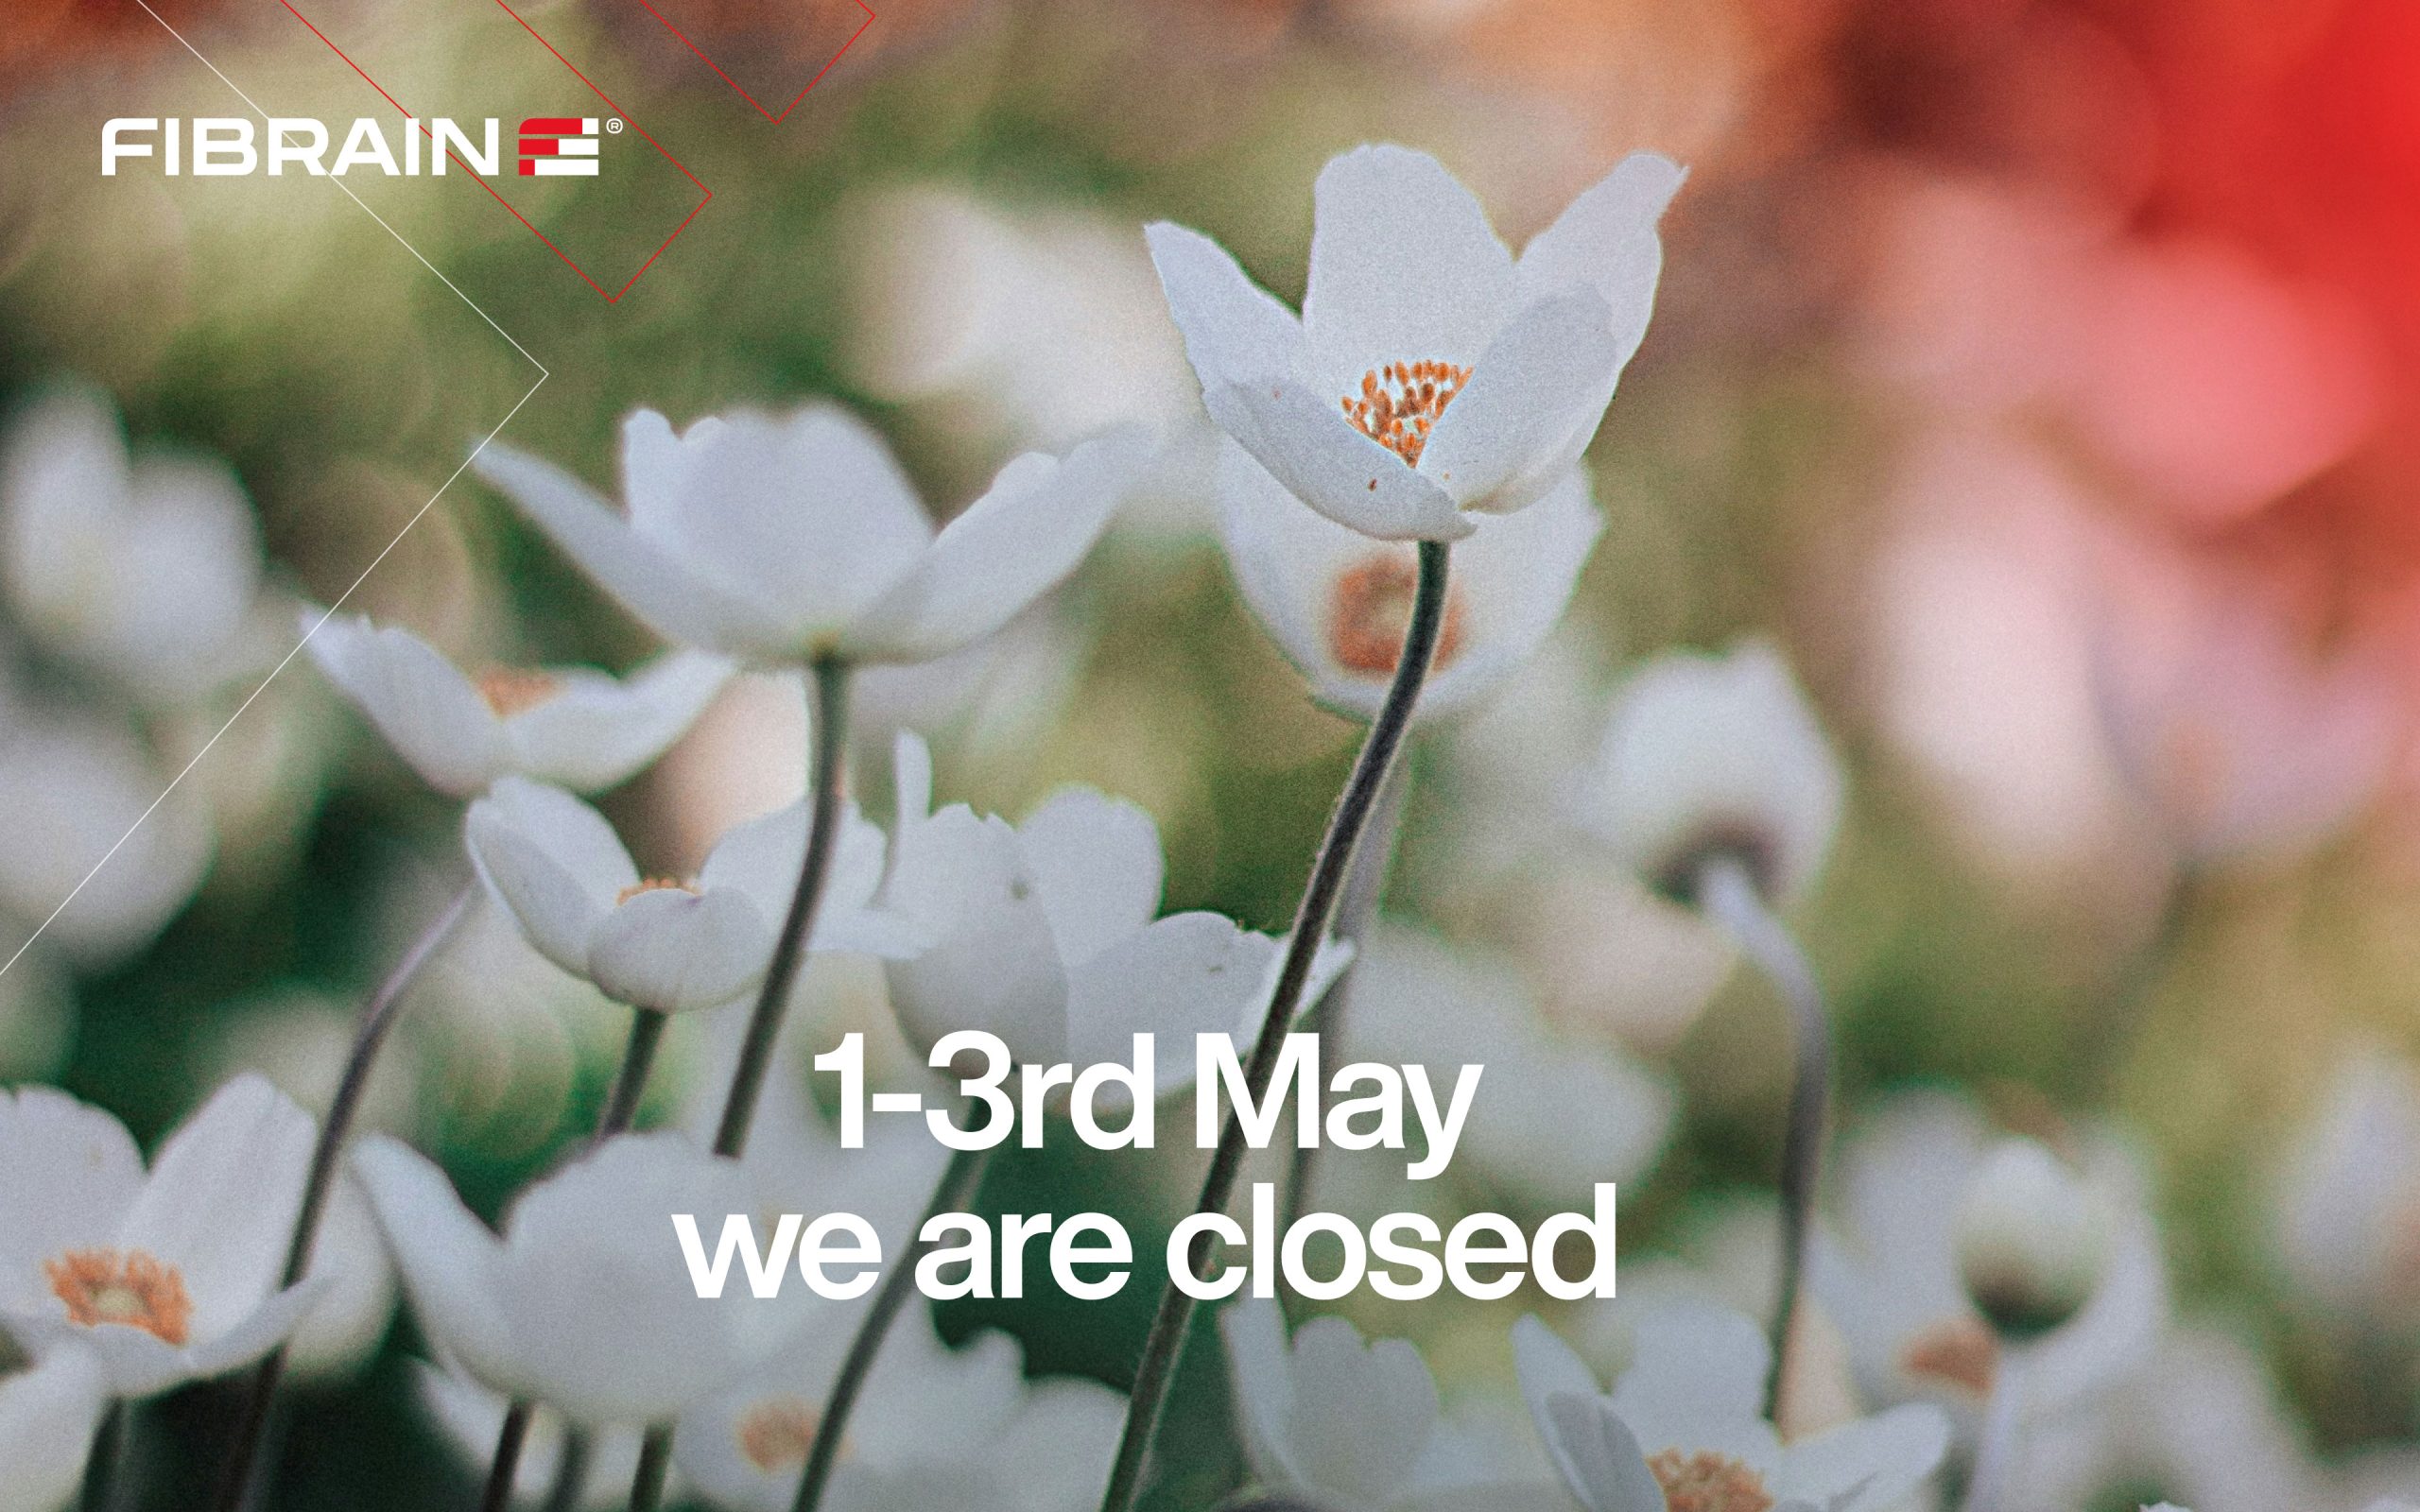 FIBRAIN is closed on 1-3rd May